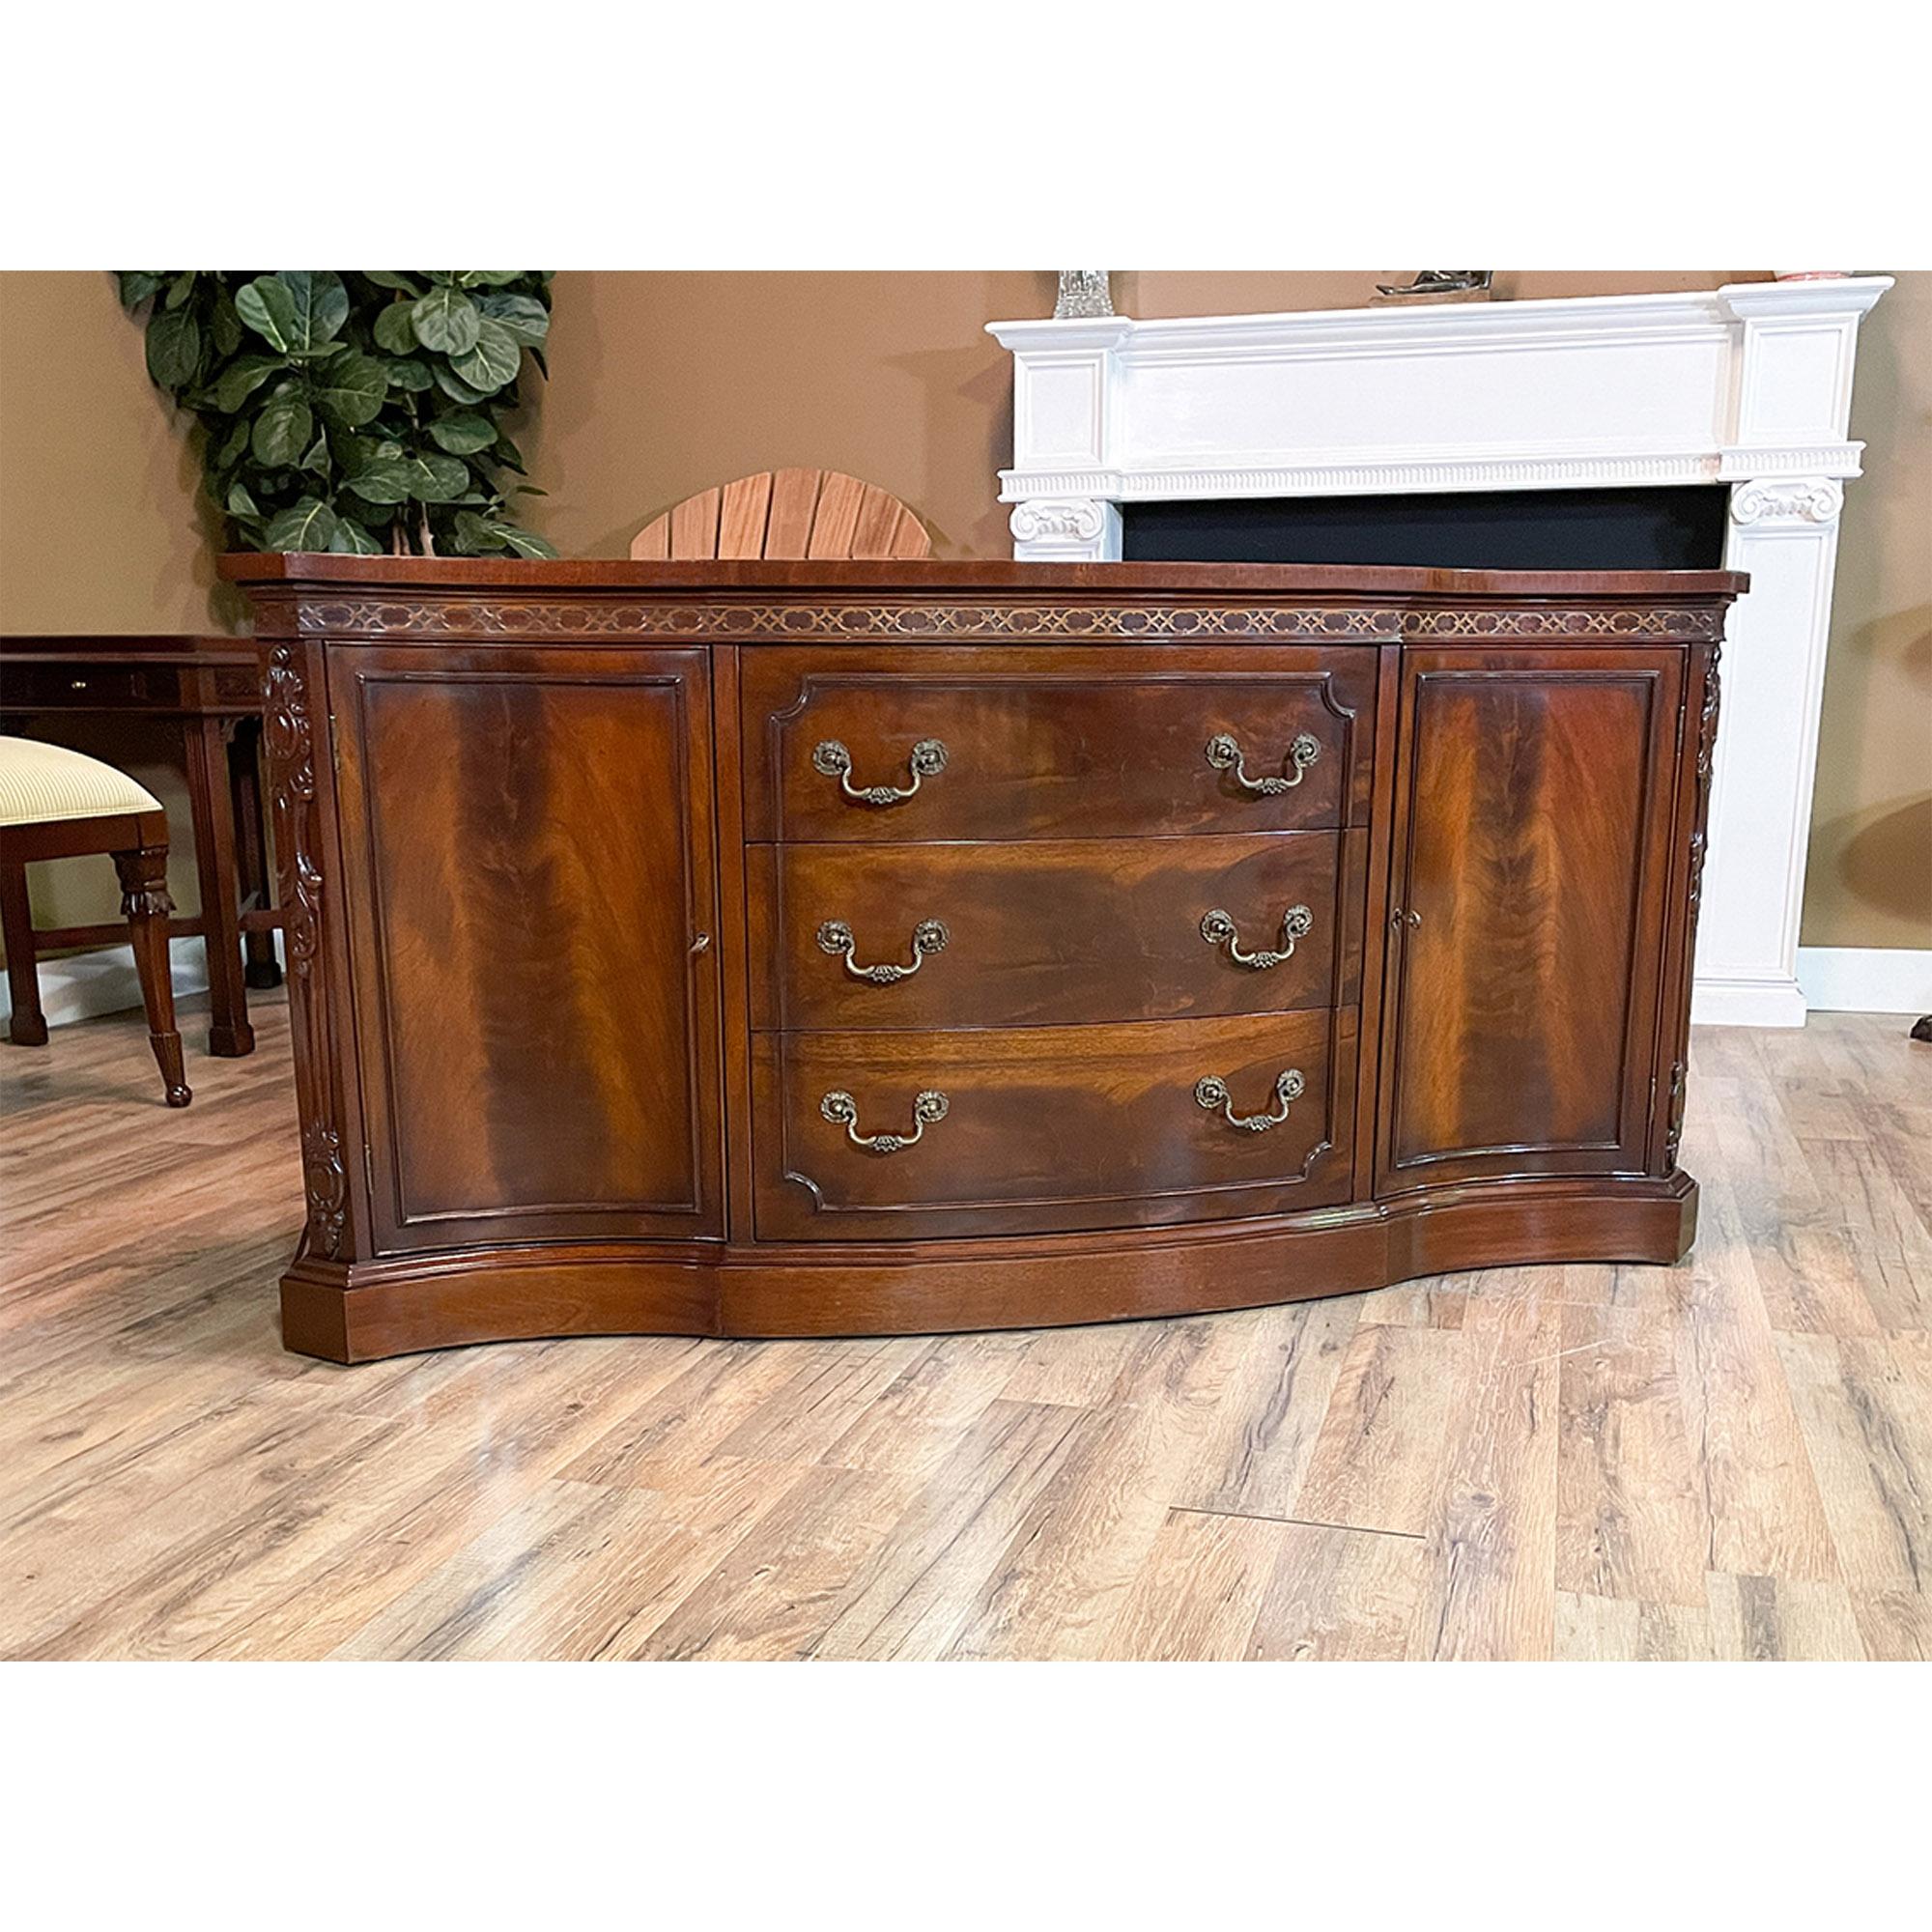 A Vintage John Stuart Two Piece Breakfront with serpentine front. This china closet is impressive in both it’s design and scale. Made of beautifully grained mahogany, the bookcase top features glass shelves as well as solid wood shelves and